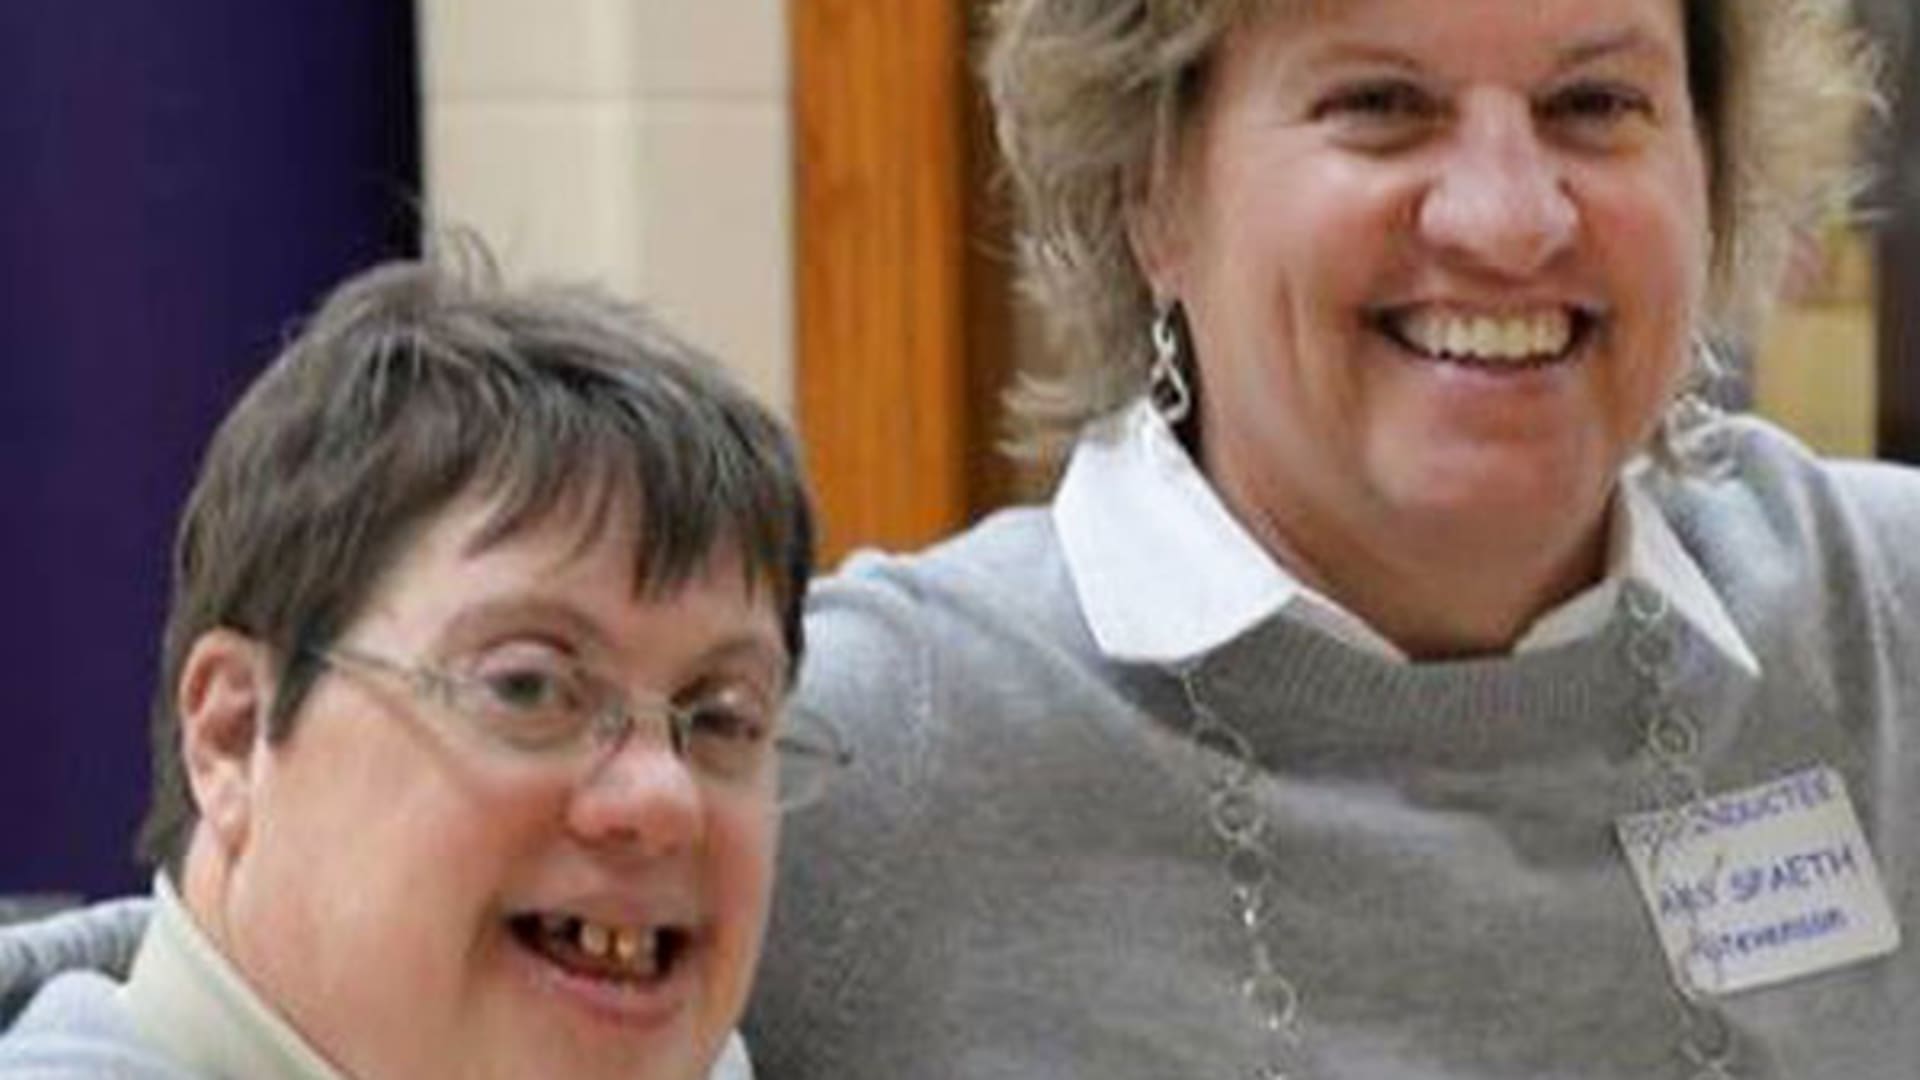 Walmart’s request for new trial denied in firing of employee with Down syndrome